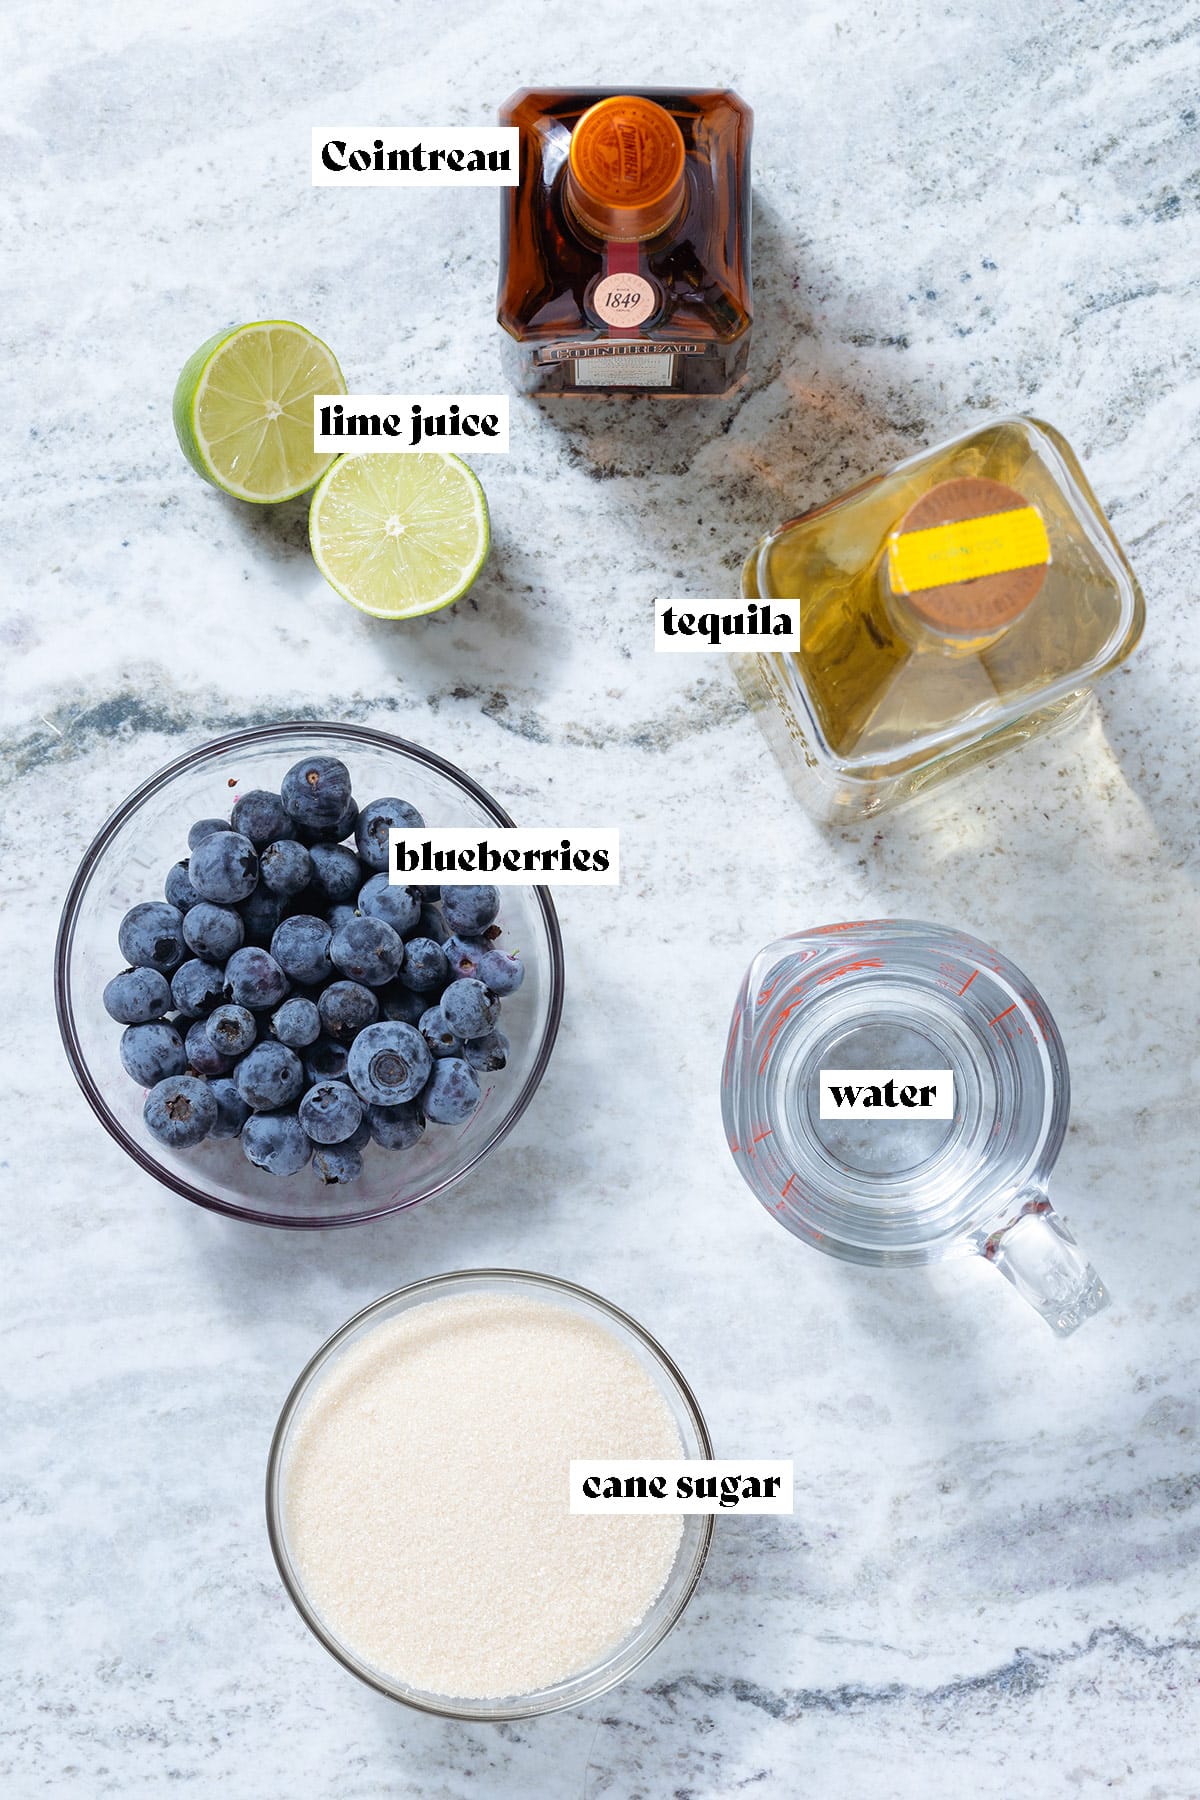 Blueberries, tequila, cointreau, limes, and other ingredients on a grey stone background.